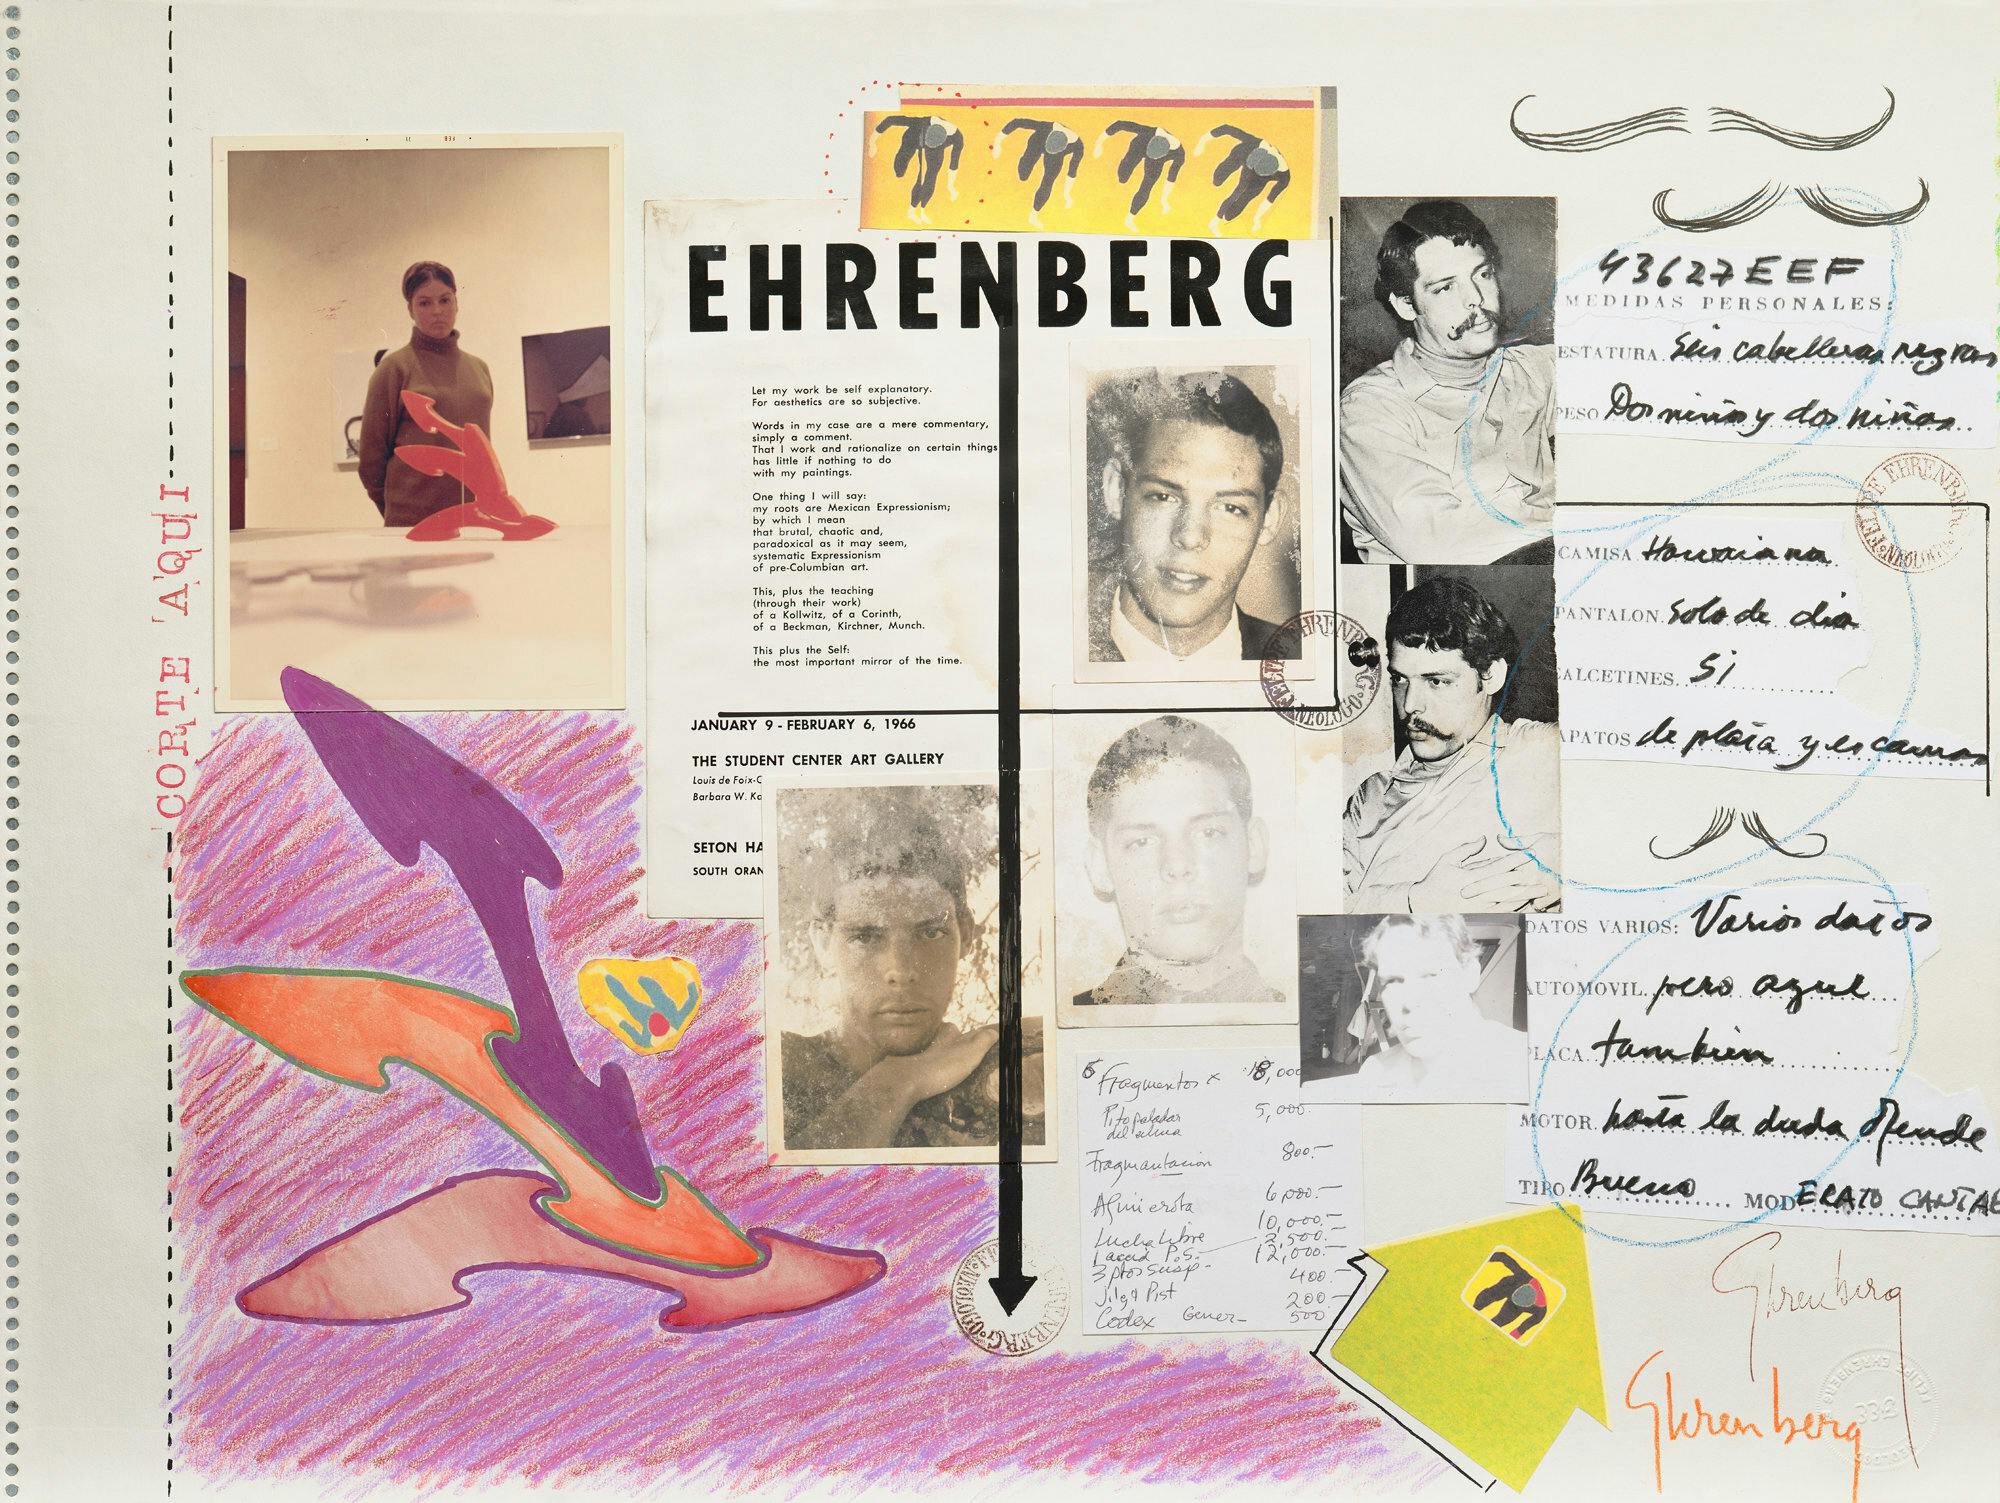 A collage showing fragments of official documents and portrait photographs of Felipe Ehrenberg with drawings of abstract shapes.